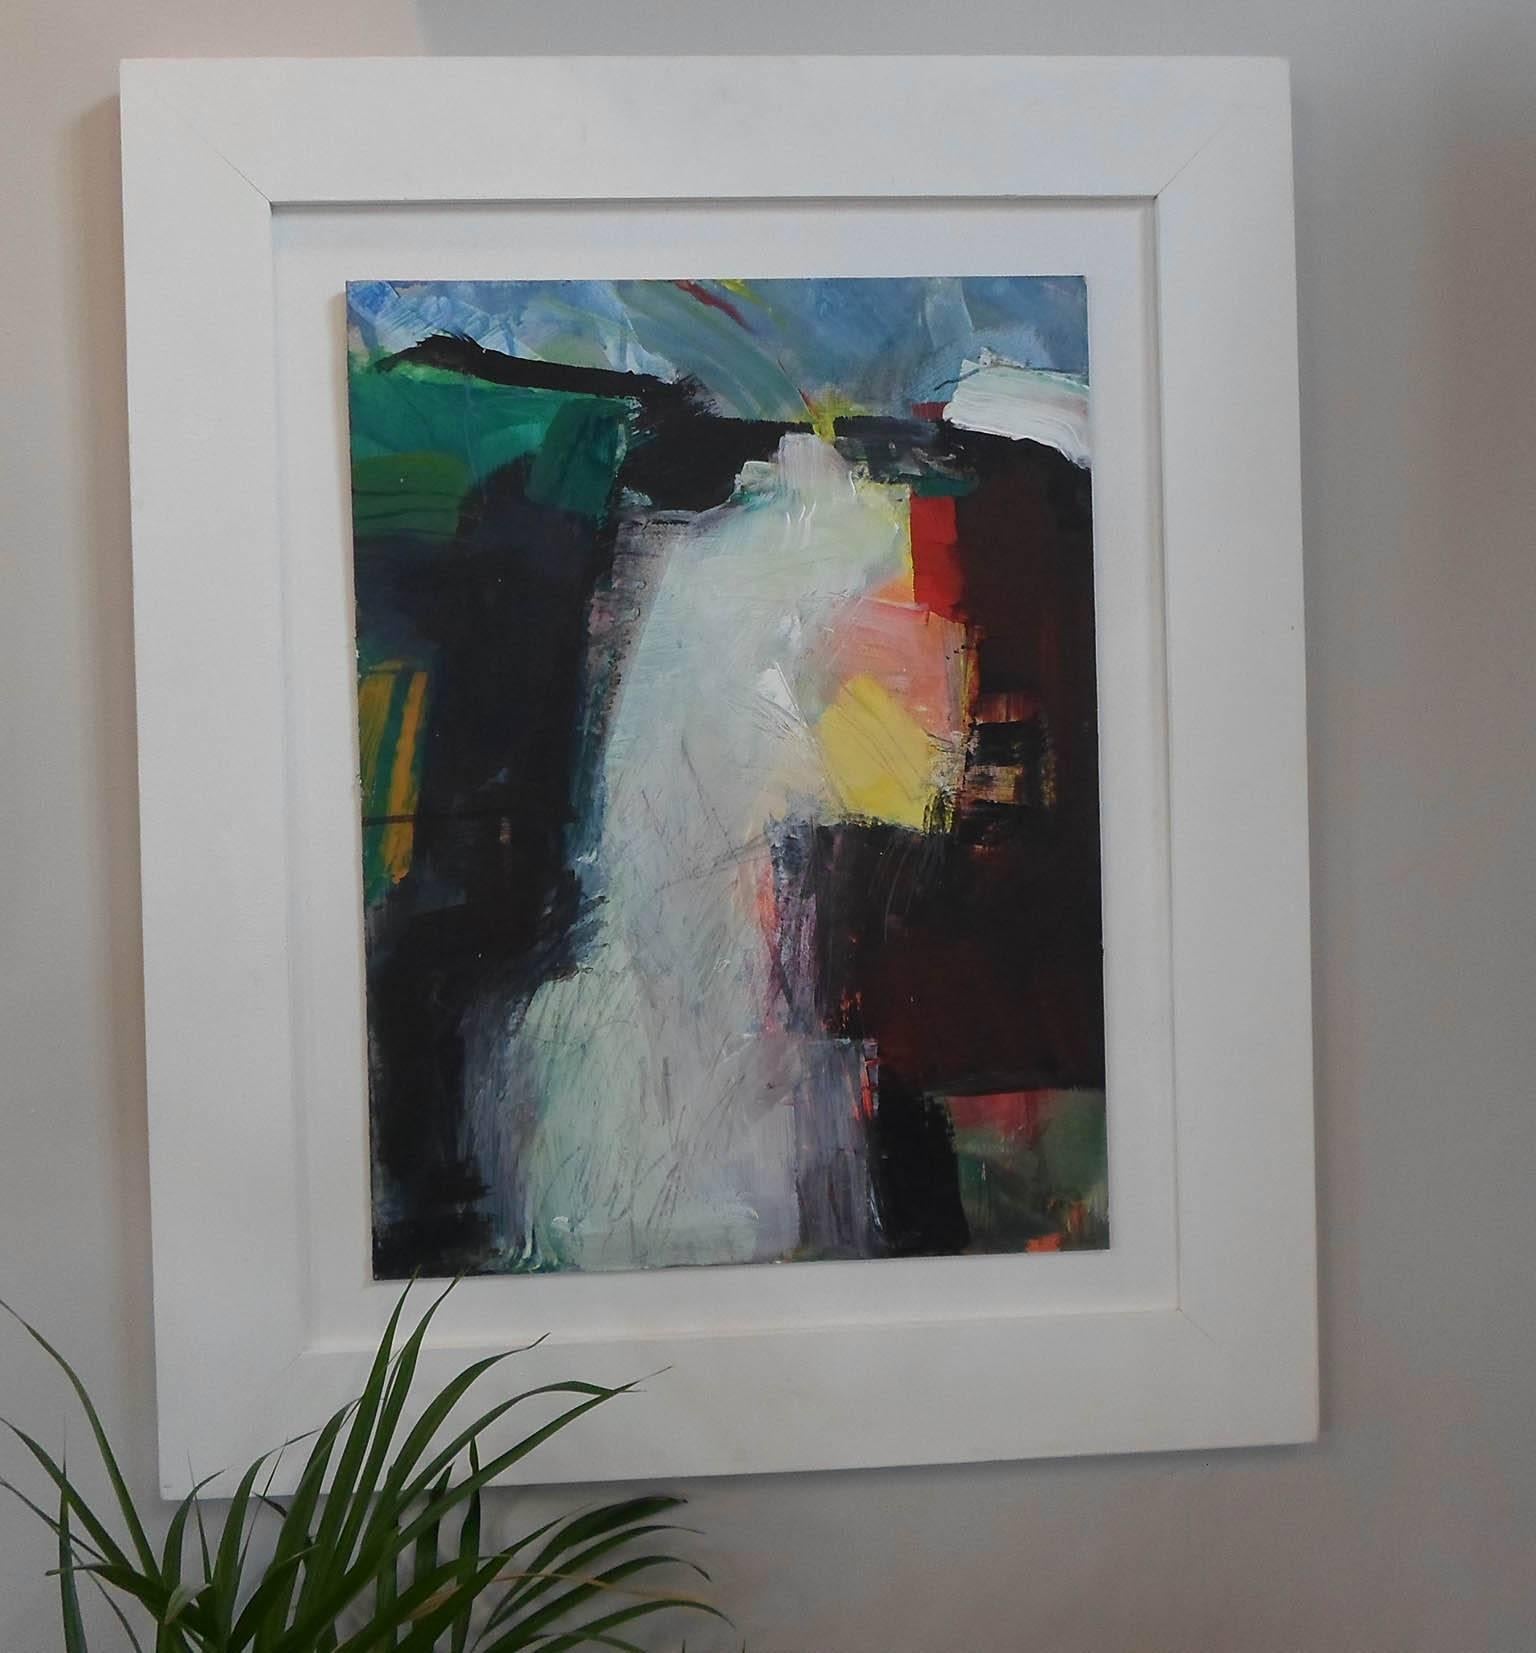 Jon Rowland's beautiful painting 'The Waterfall #2' is an abstracted interpretation of the power of nature, bringing together colour and movement. The only thing missing is the sound of the water!

This piece is an Acrylic Painting on Board and is